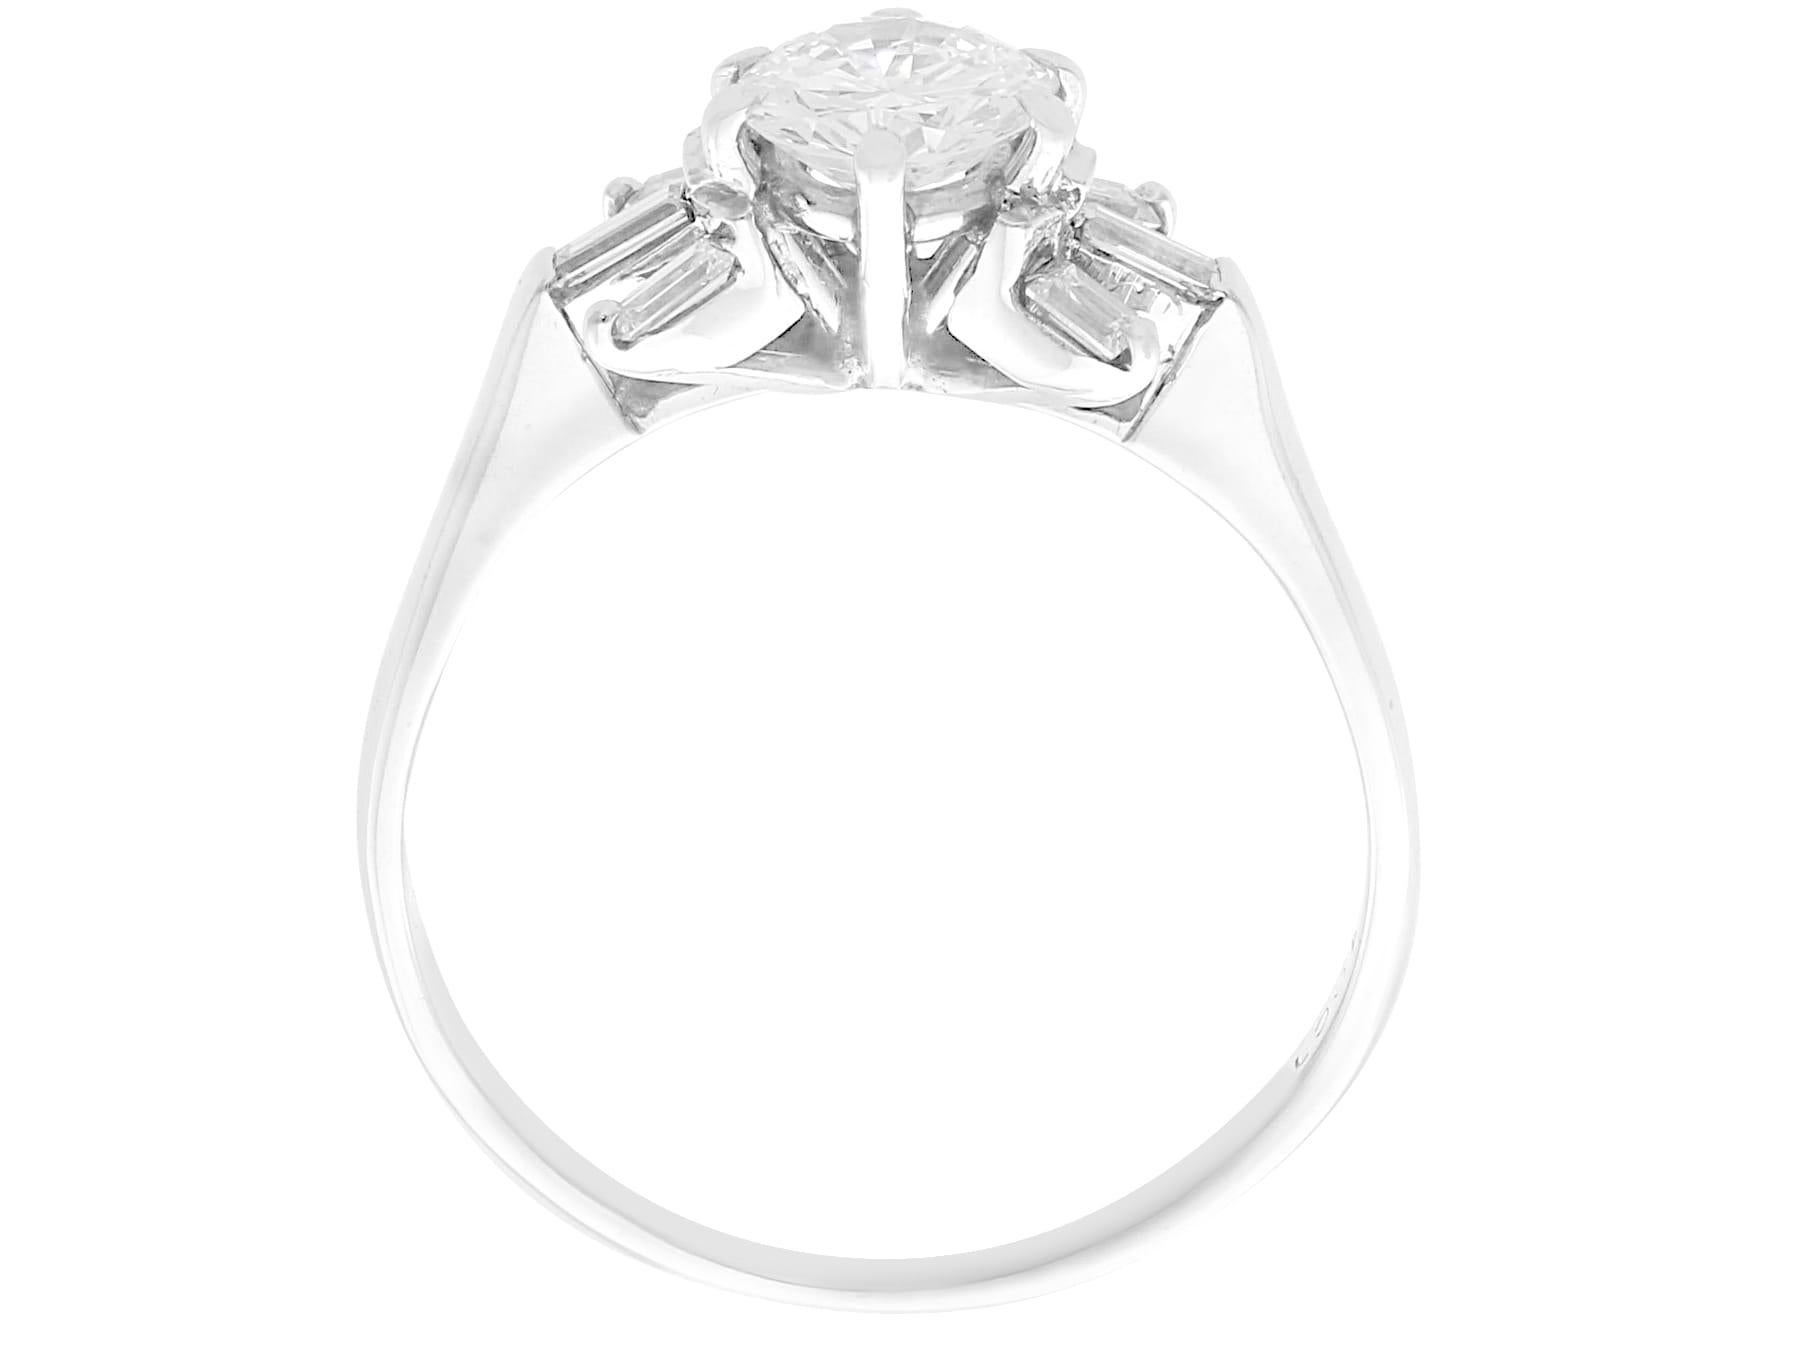 Women's or Men's Antique 1.11Ct Diamond and 18k White Gold Solitaire Ring Circa 1935 For Sale